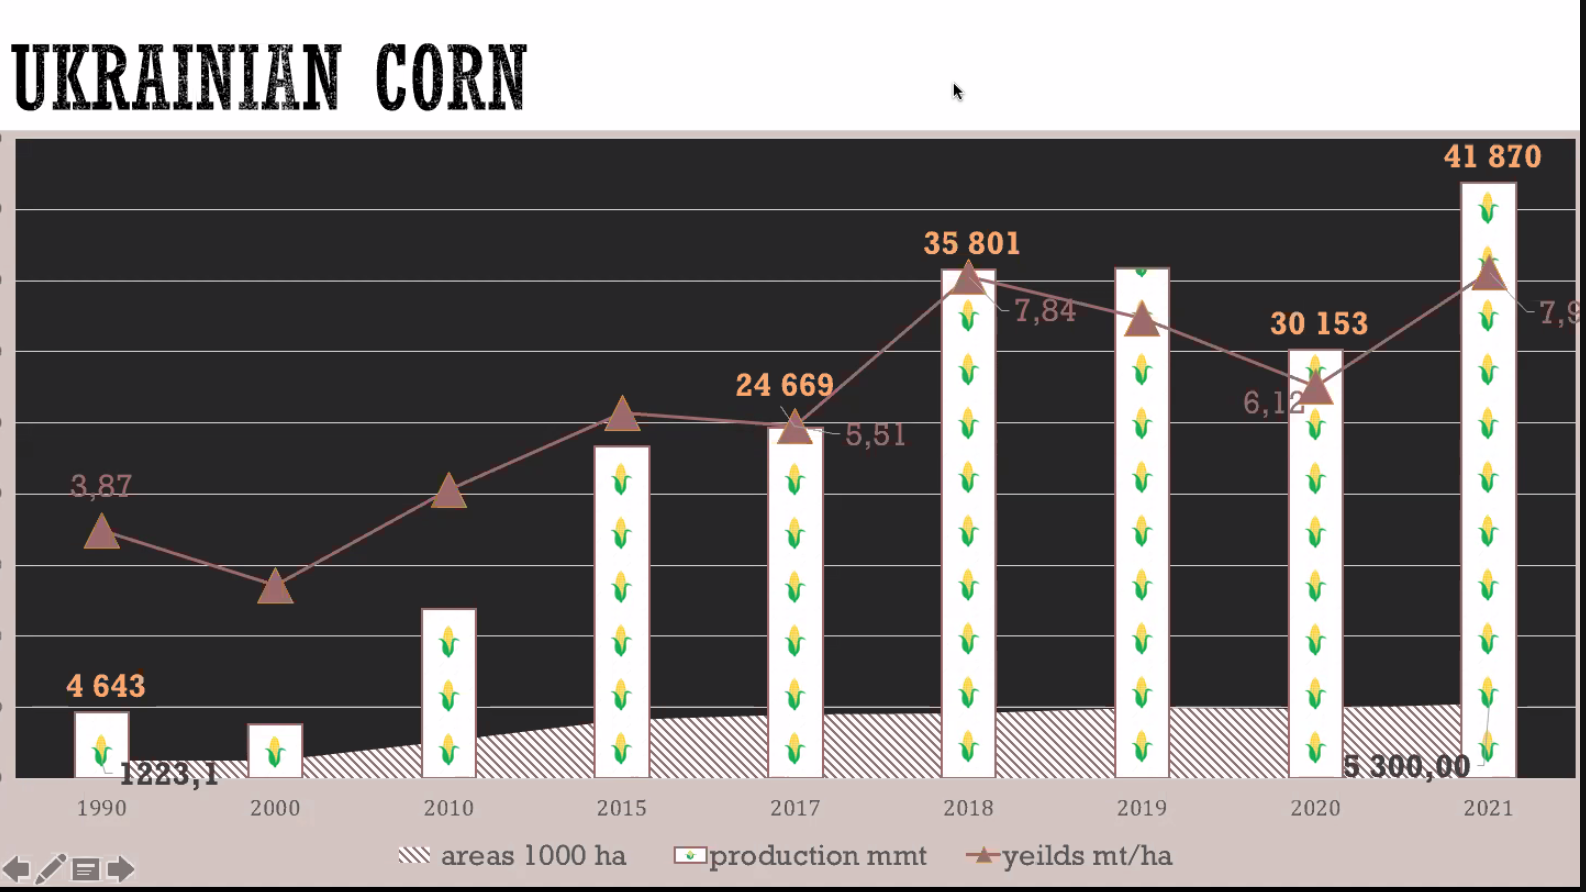 Corn production in Ukraine in 1990-2021 (click for higher resolution)